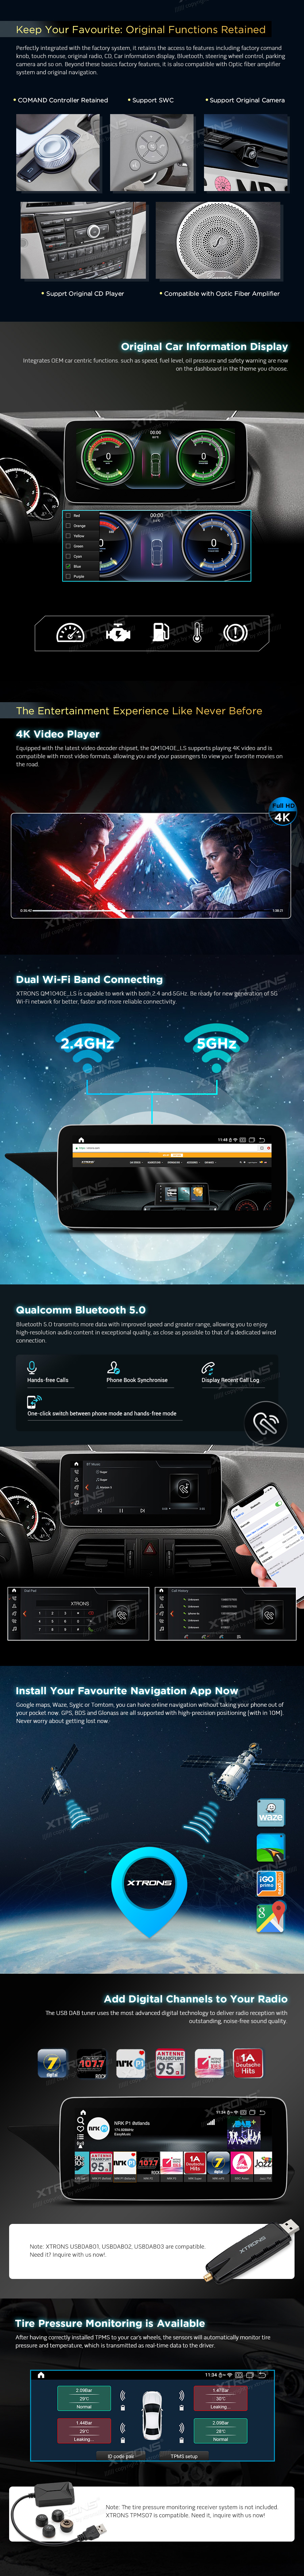 mercedes-benz android multimedia